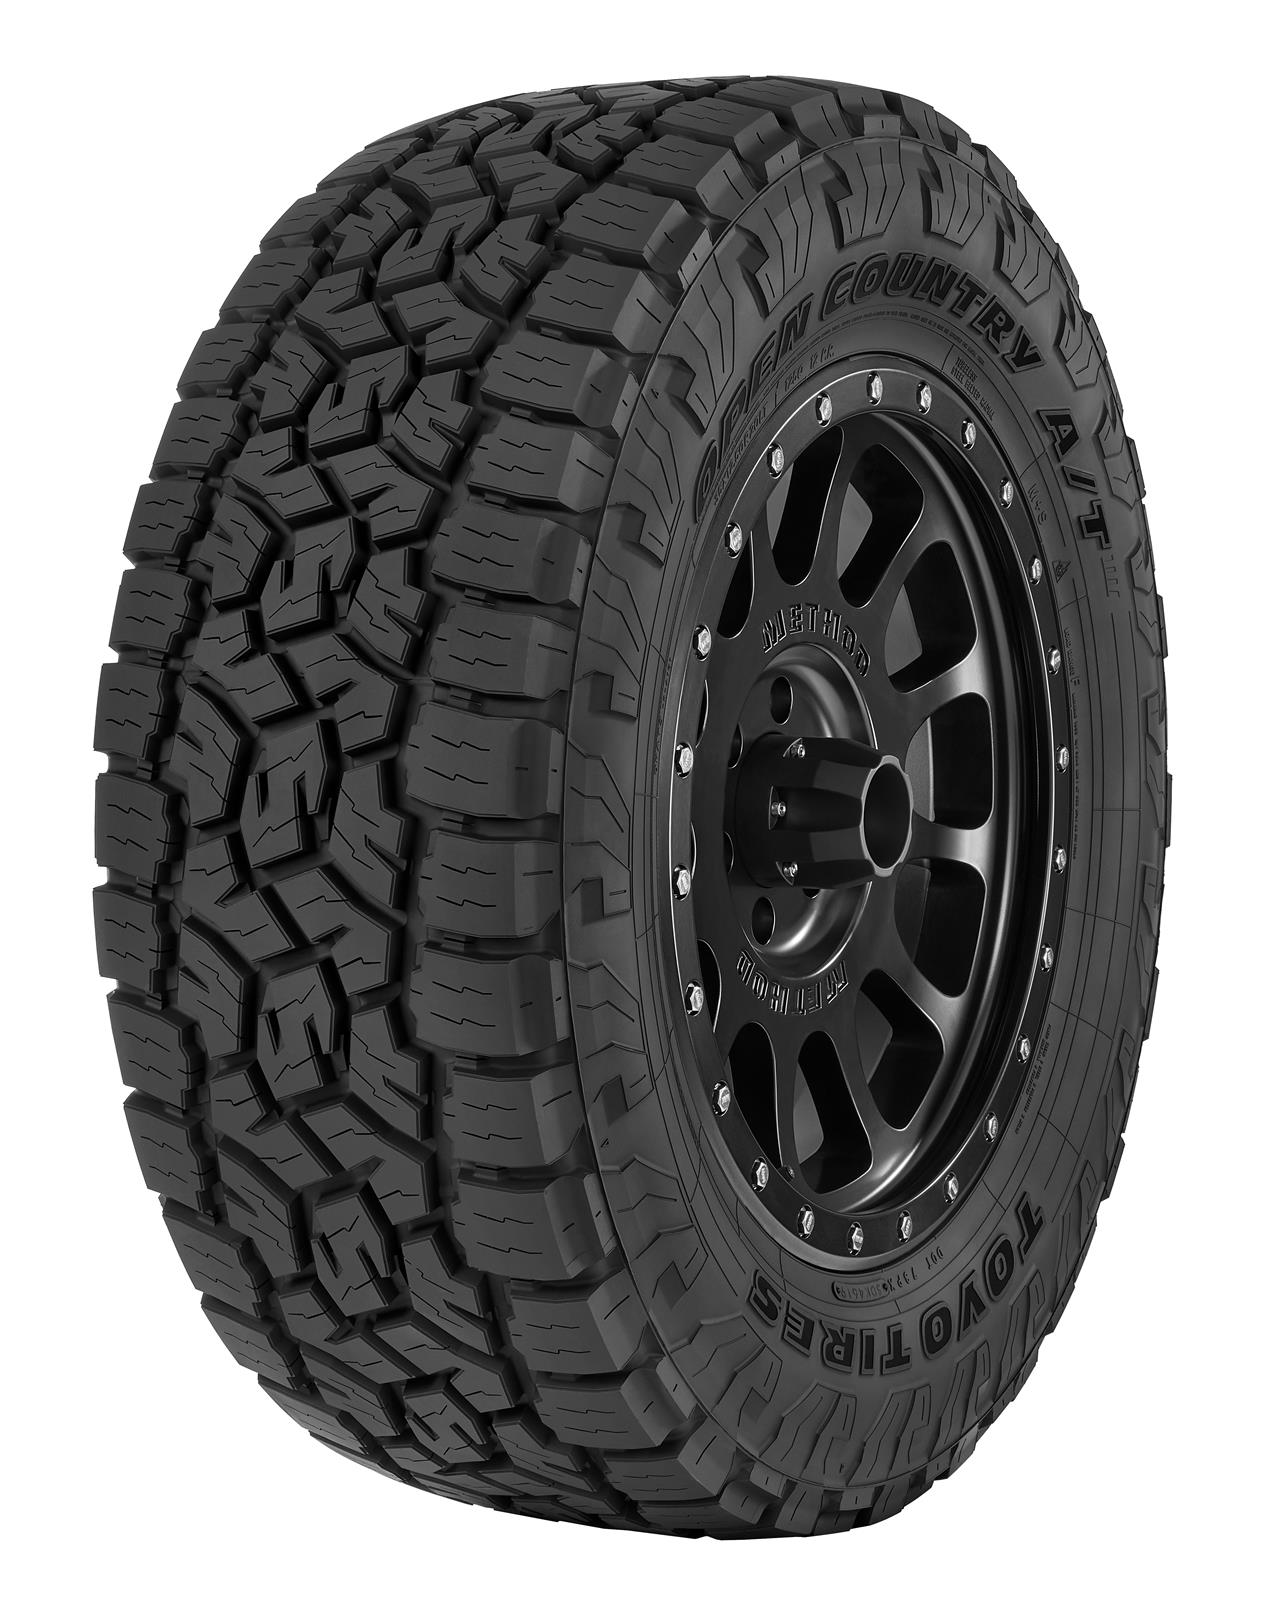 Ford Bronco Are 32" all terrain tires available on the Outer Banks model? 1671203892189